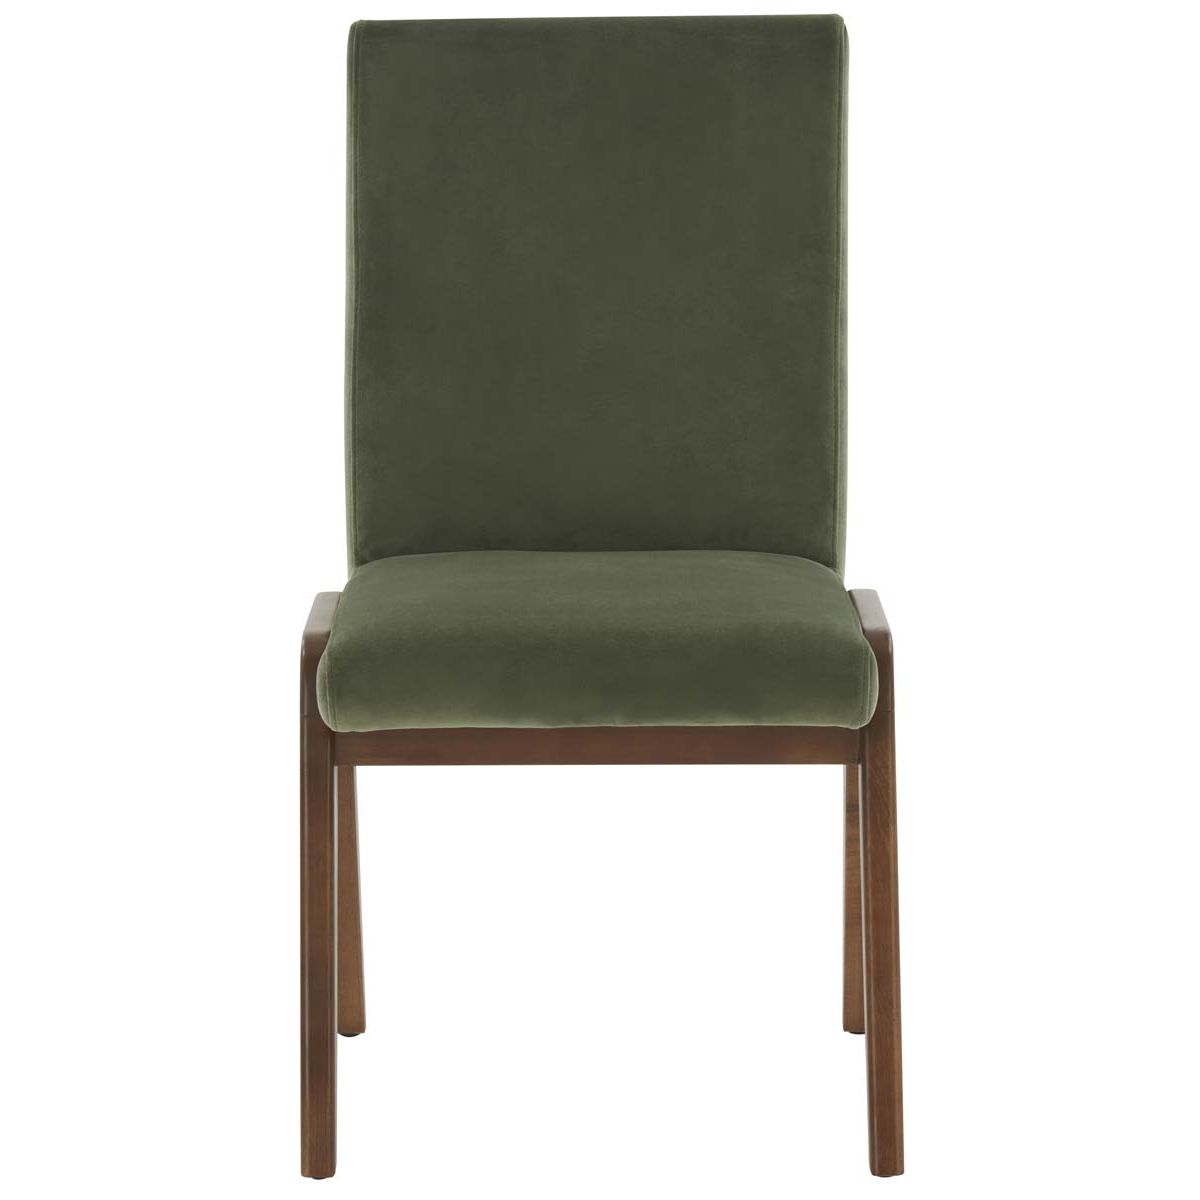 Safavieh Couture Forrest Dining Chair